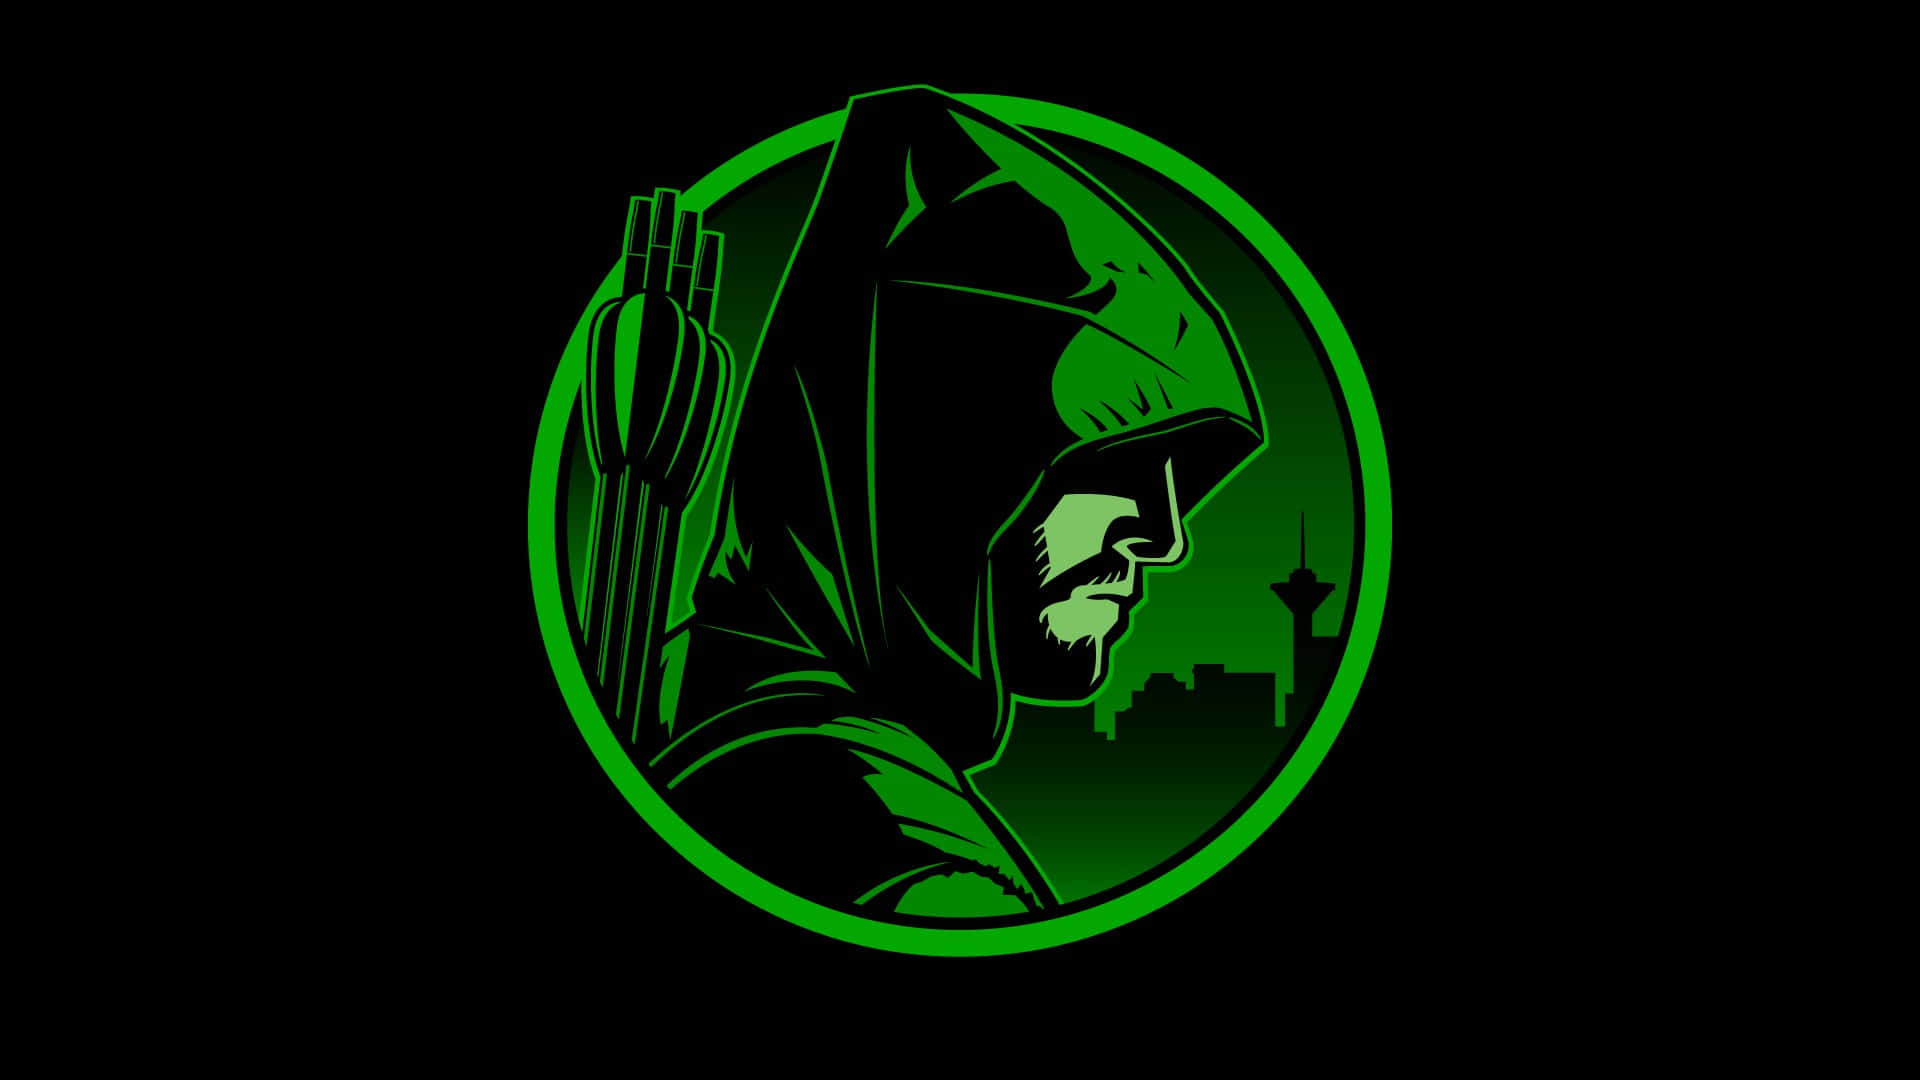 Fight for your cause with Green Arrow